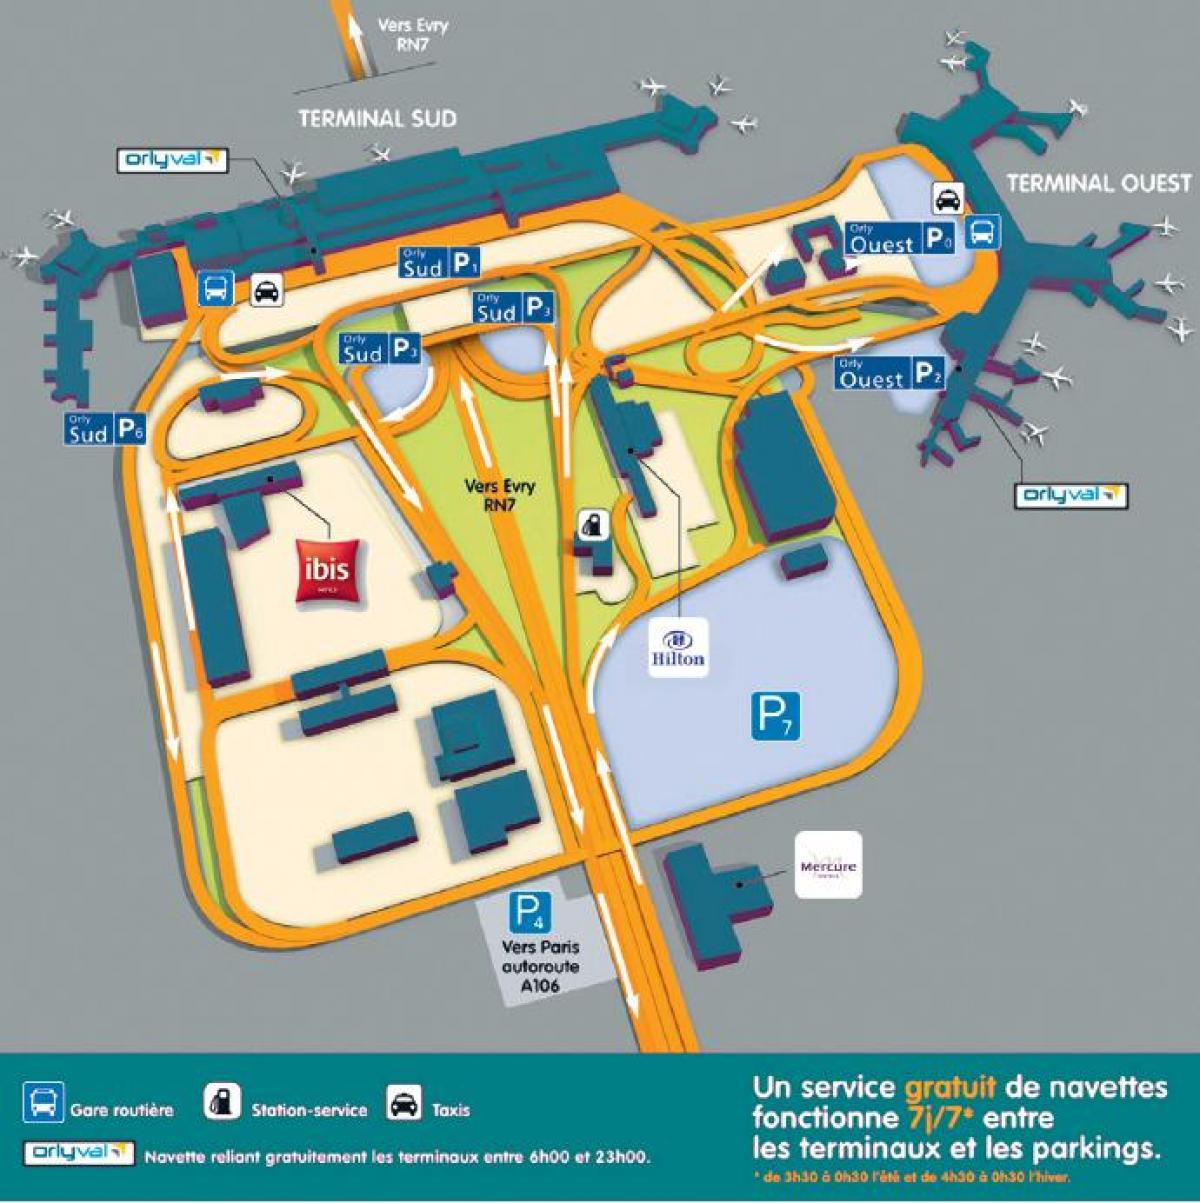 Map of Orly airport